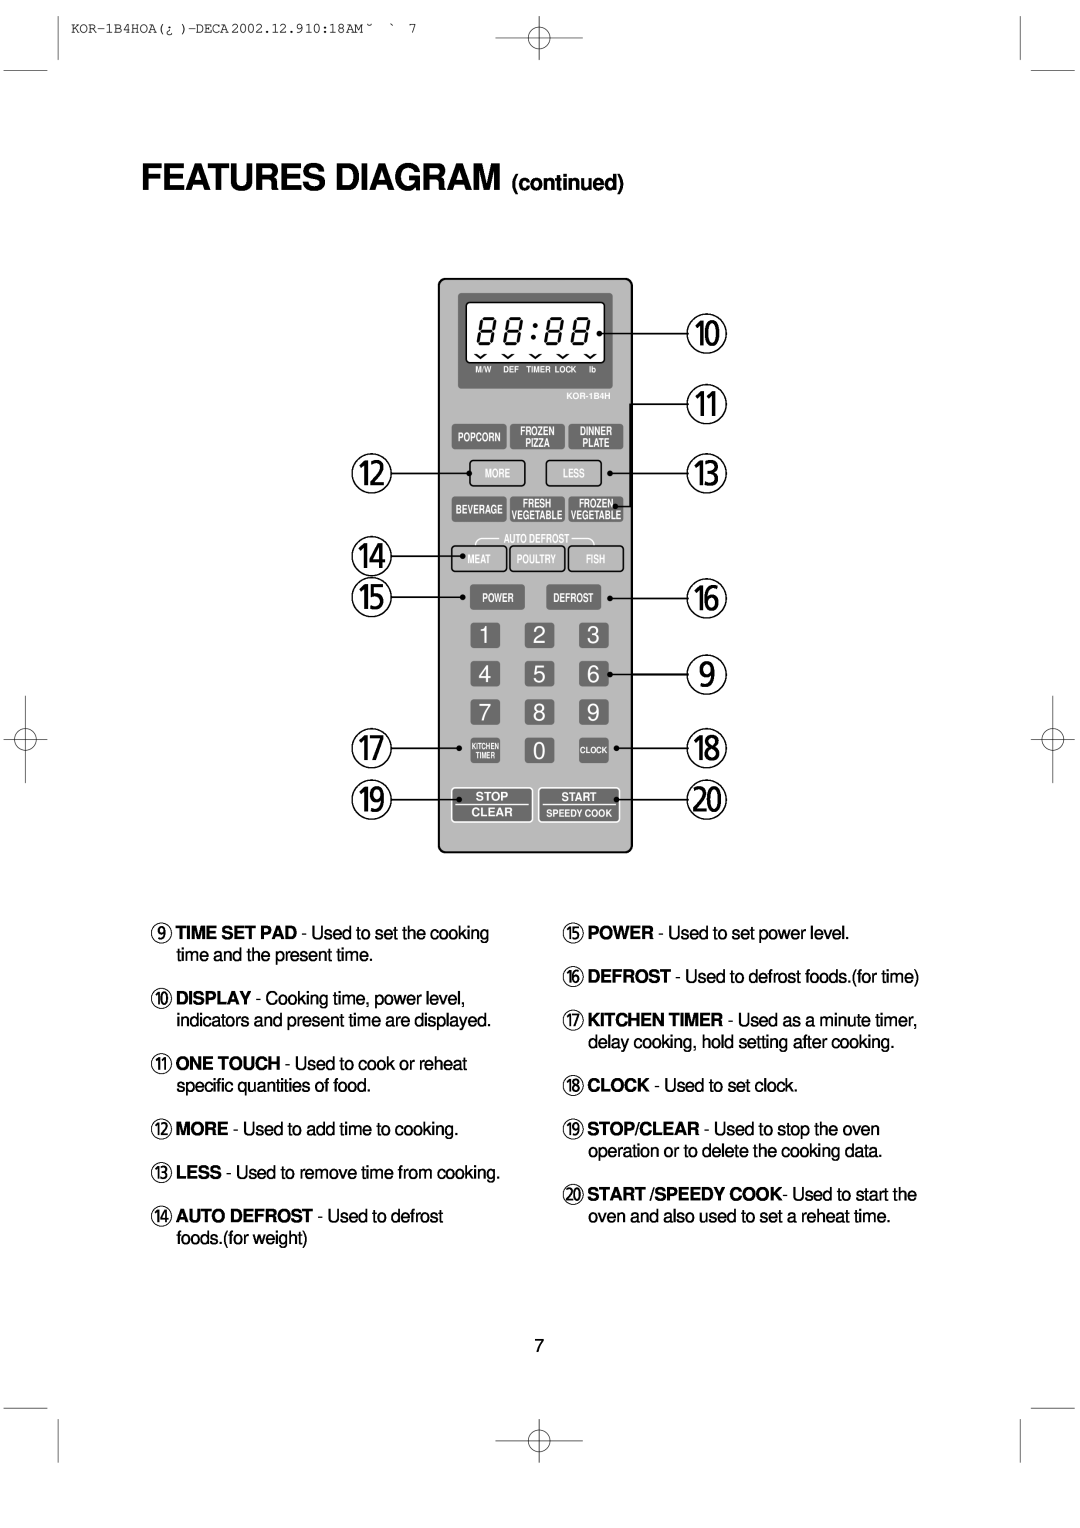 Daewoo KOR-1B4H manual FEATURES DIAGRAM continued, r AUTO DEFROST - Used to defrost foods.for weight, w r t, q e y 